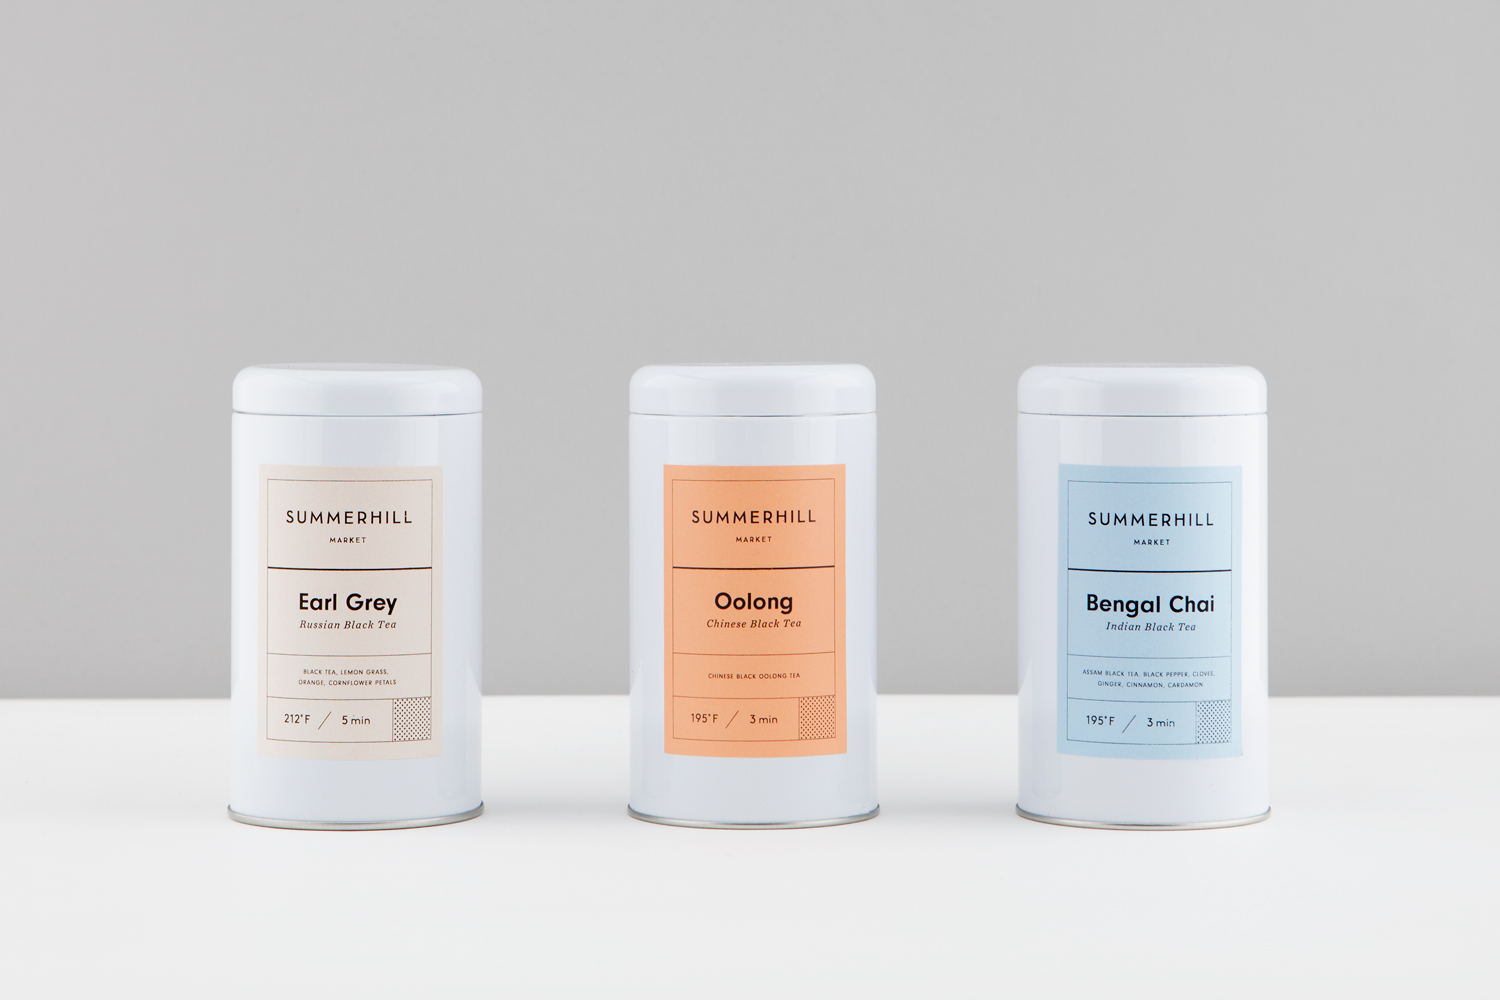 Branding and tea packaging designed by Canadian studio Blok for Toronto based boutique grocery store Summerhill Market